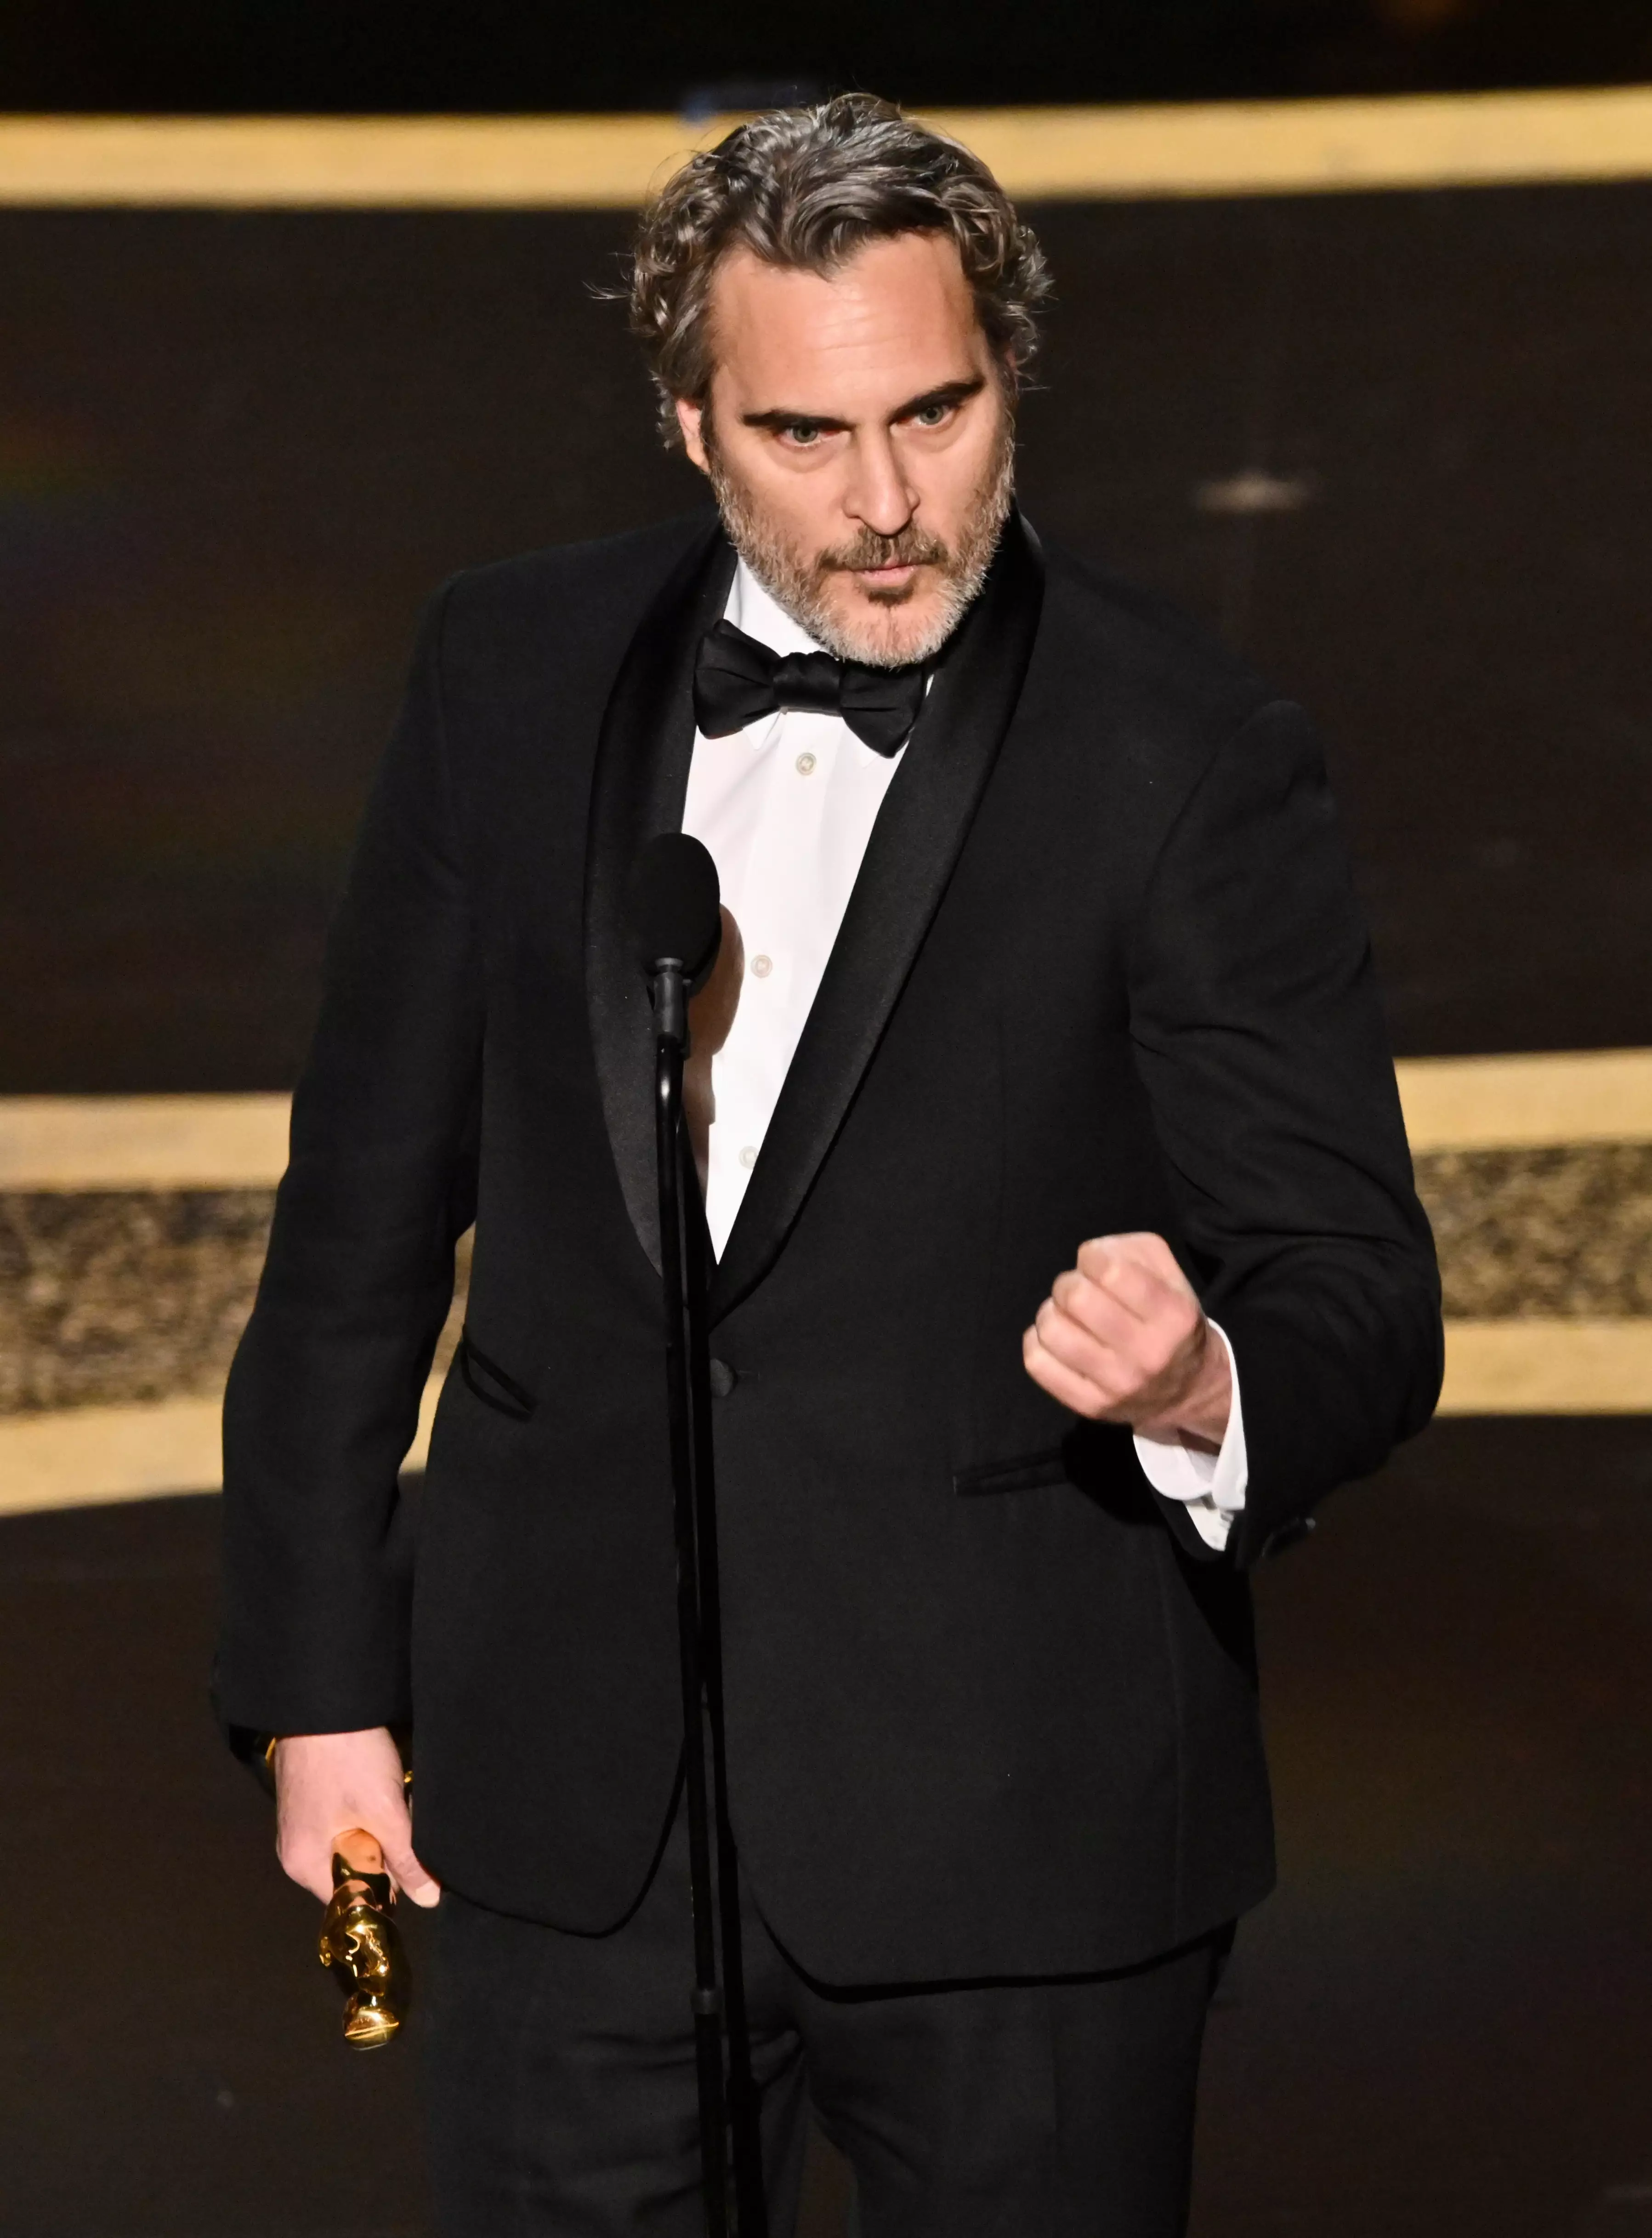 Joaquin Phoenix picking up his award for Best Actor.